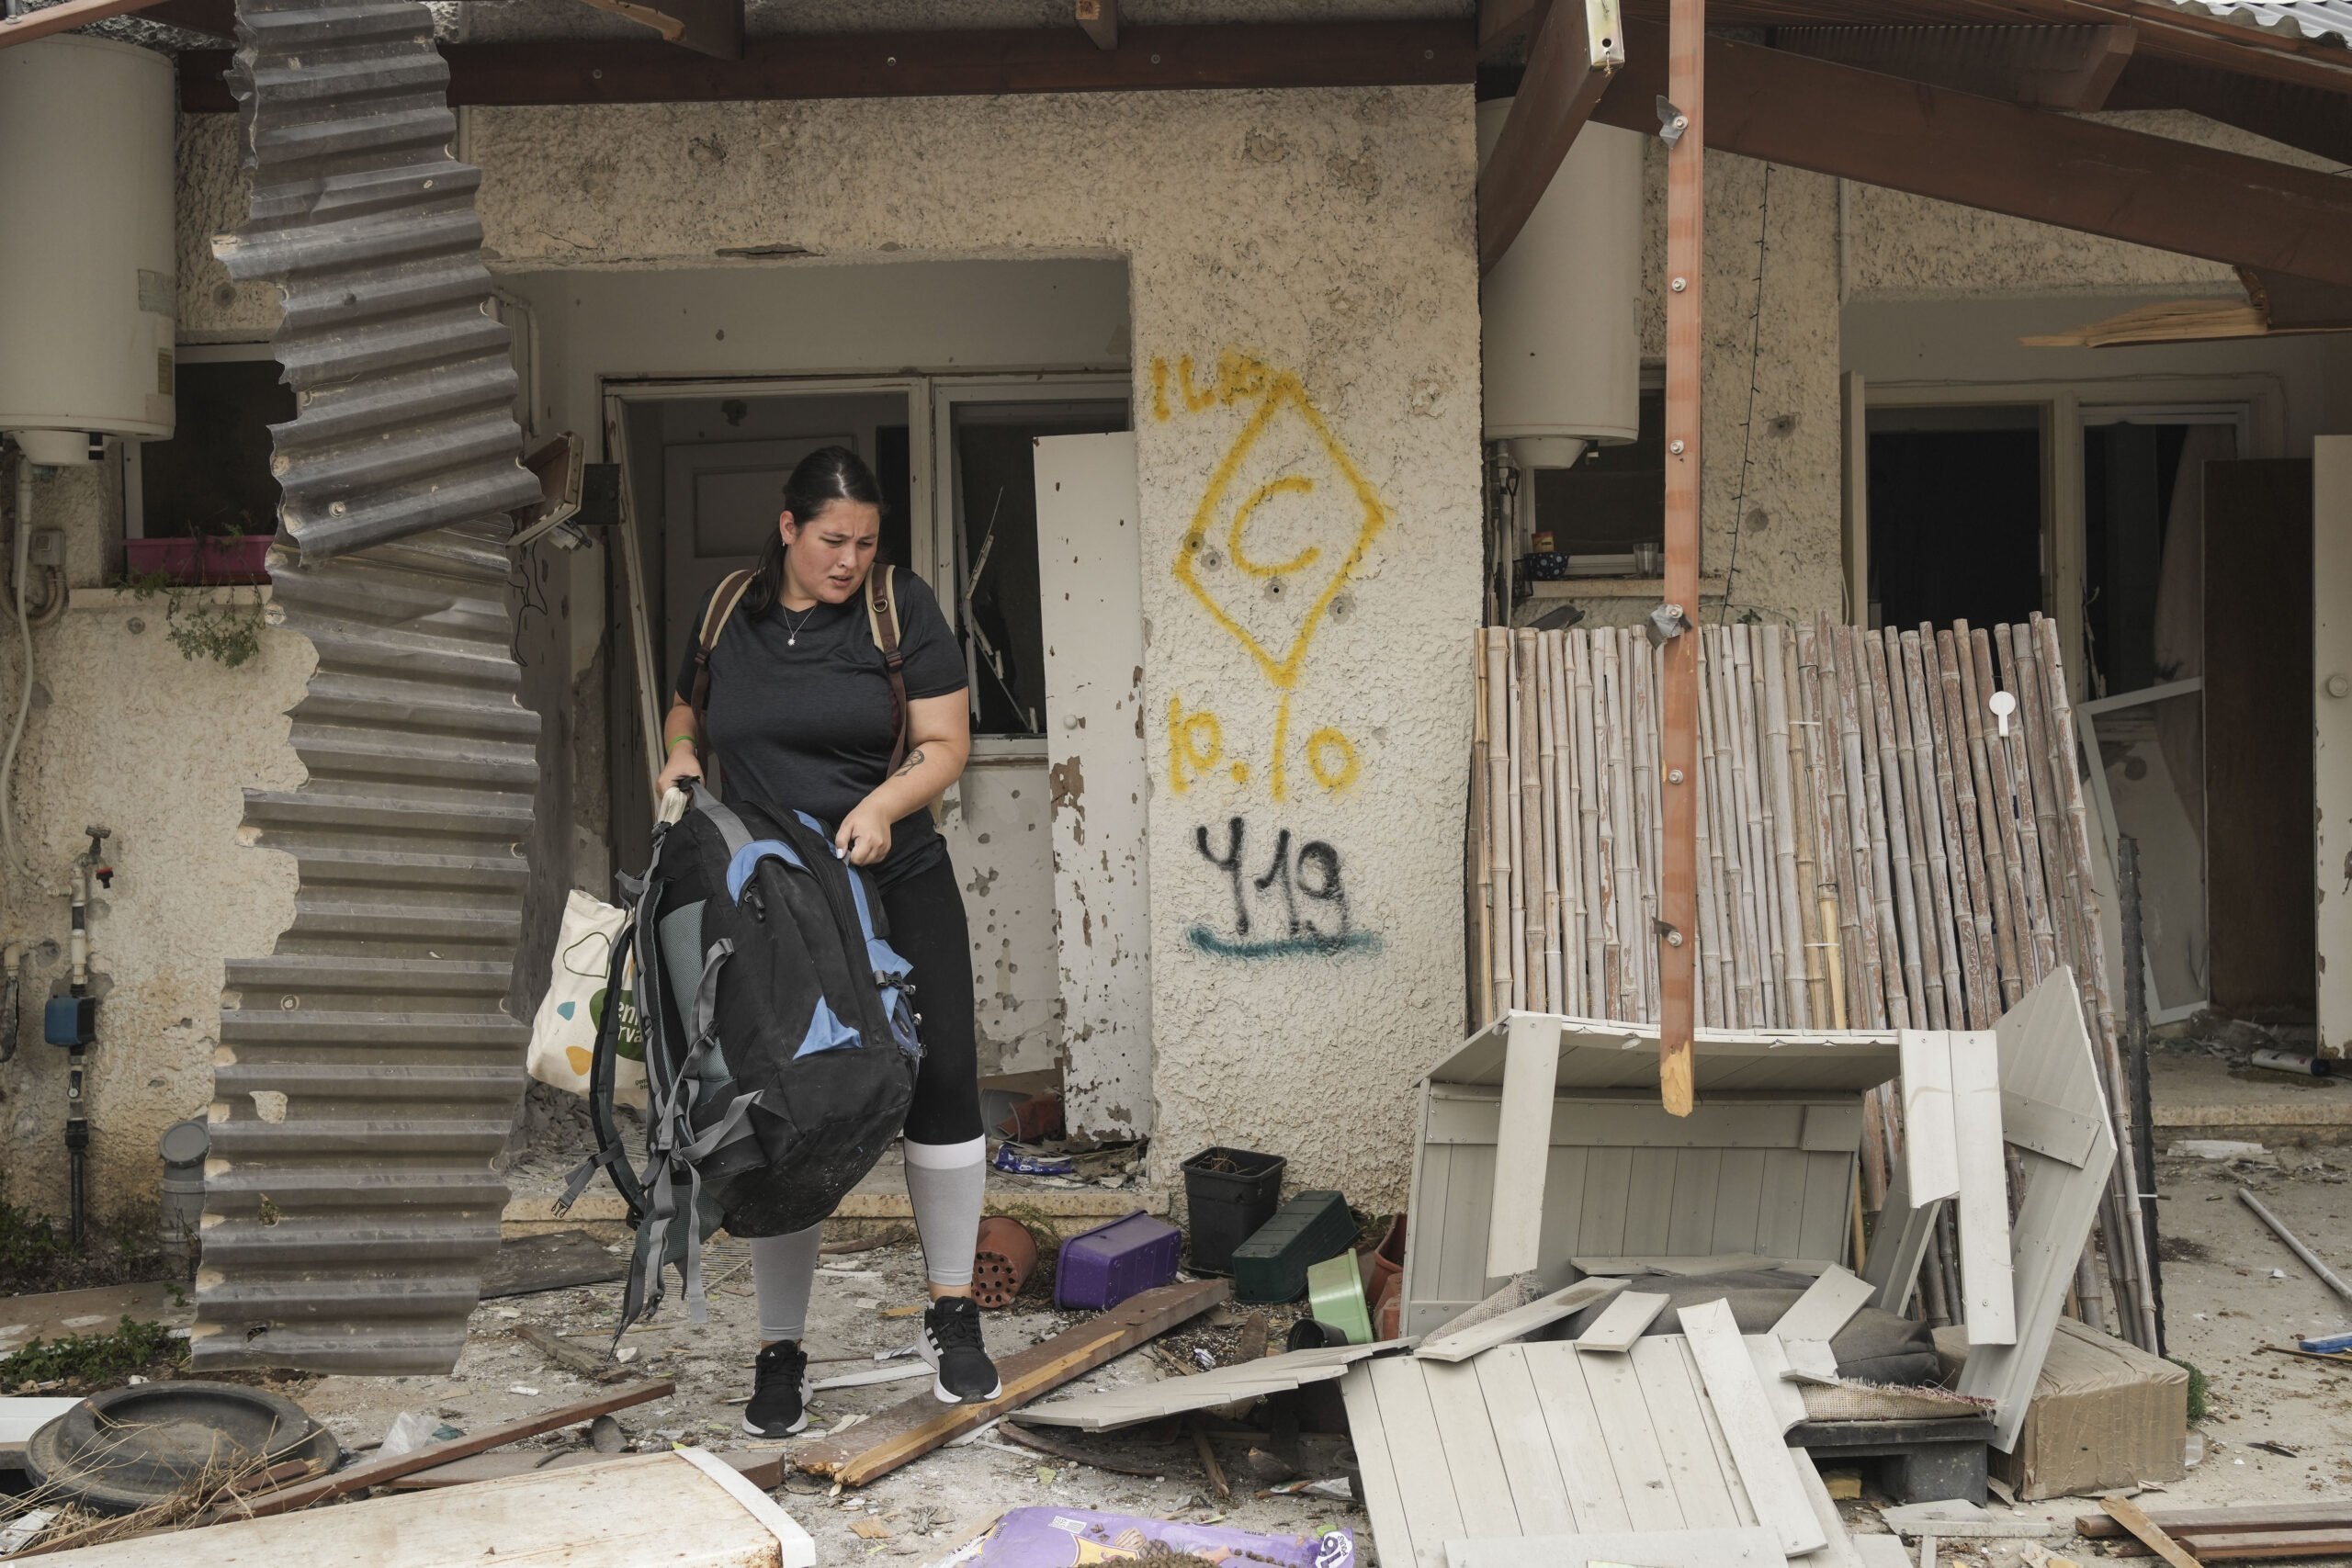 A woman recovers items from a house damaged during the Hamas attack in Kibbutz Kfar Azza, Israel. T...